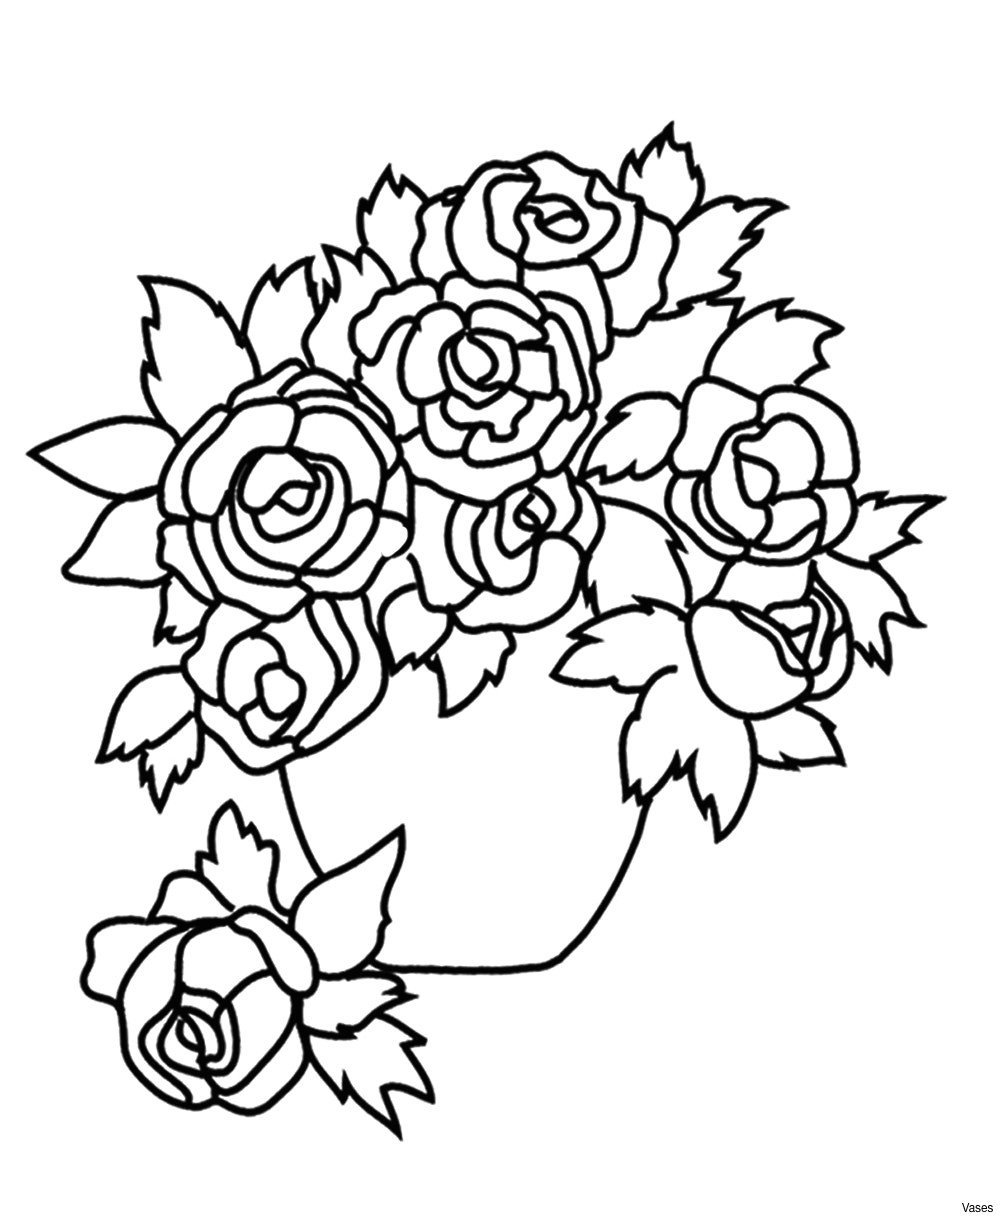 Drawing Of A Rose with Color Rose Flower Vase to Color Www tollebild Com